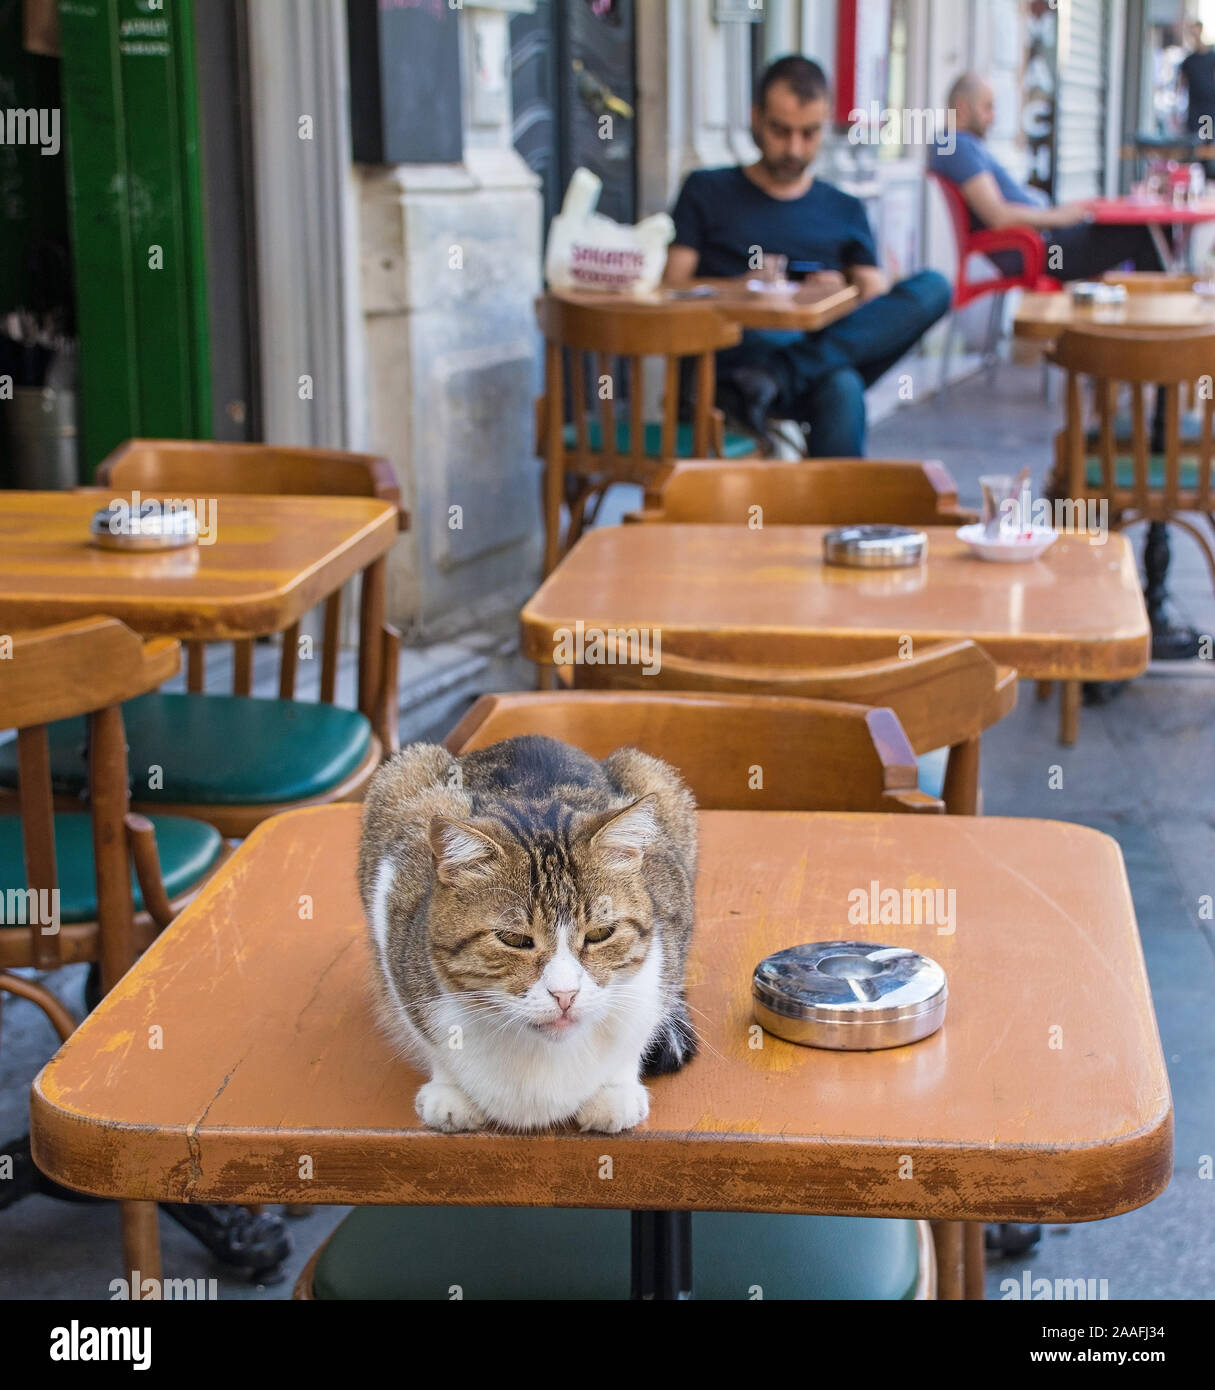 Istanbul, Turkey - September 7th 2019. One of Istanbuls numerous street cats makes himself at home on cafe table in the Beyoglu district Stock Photo